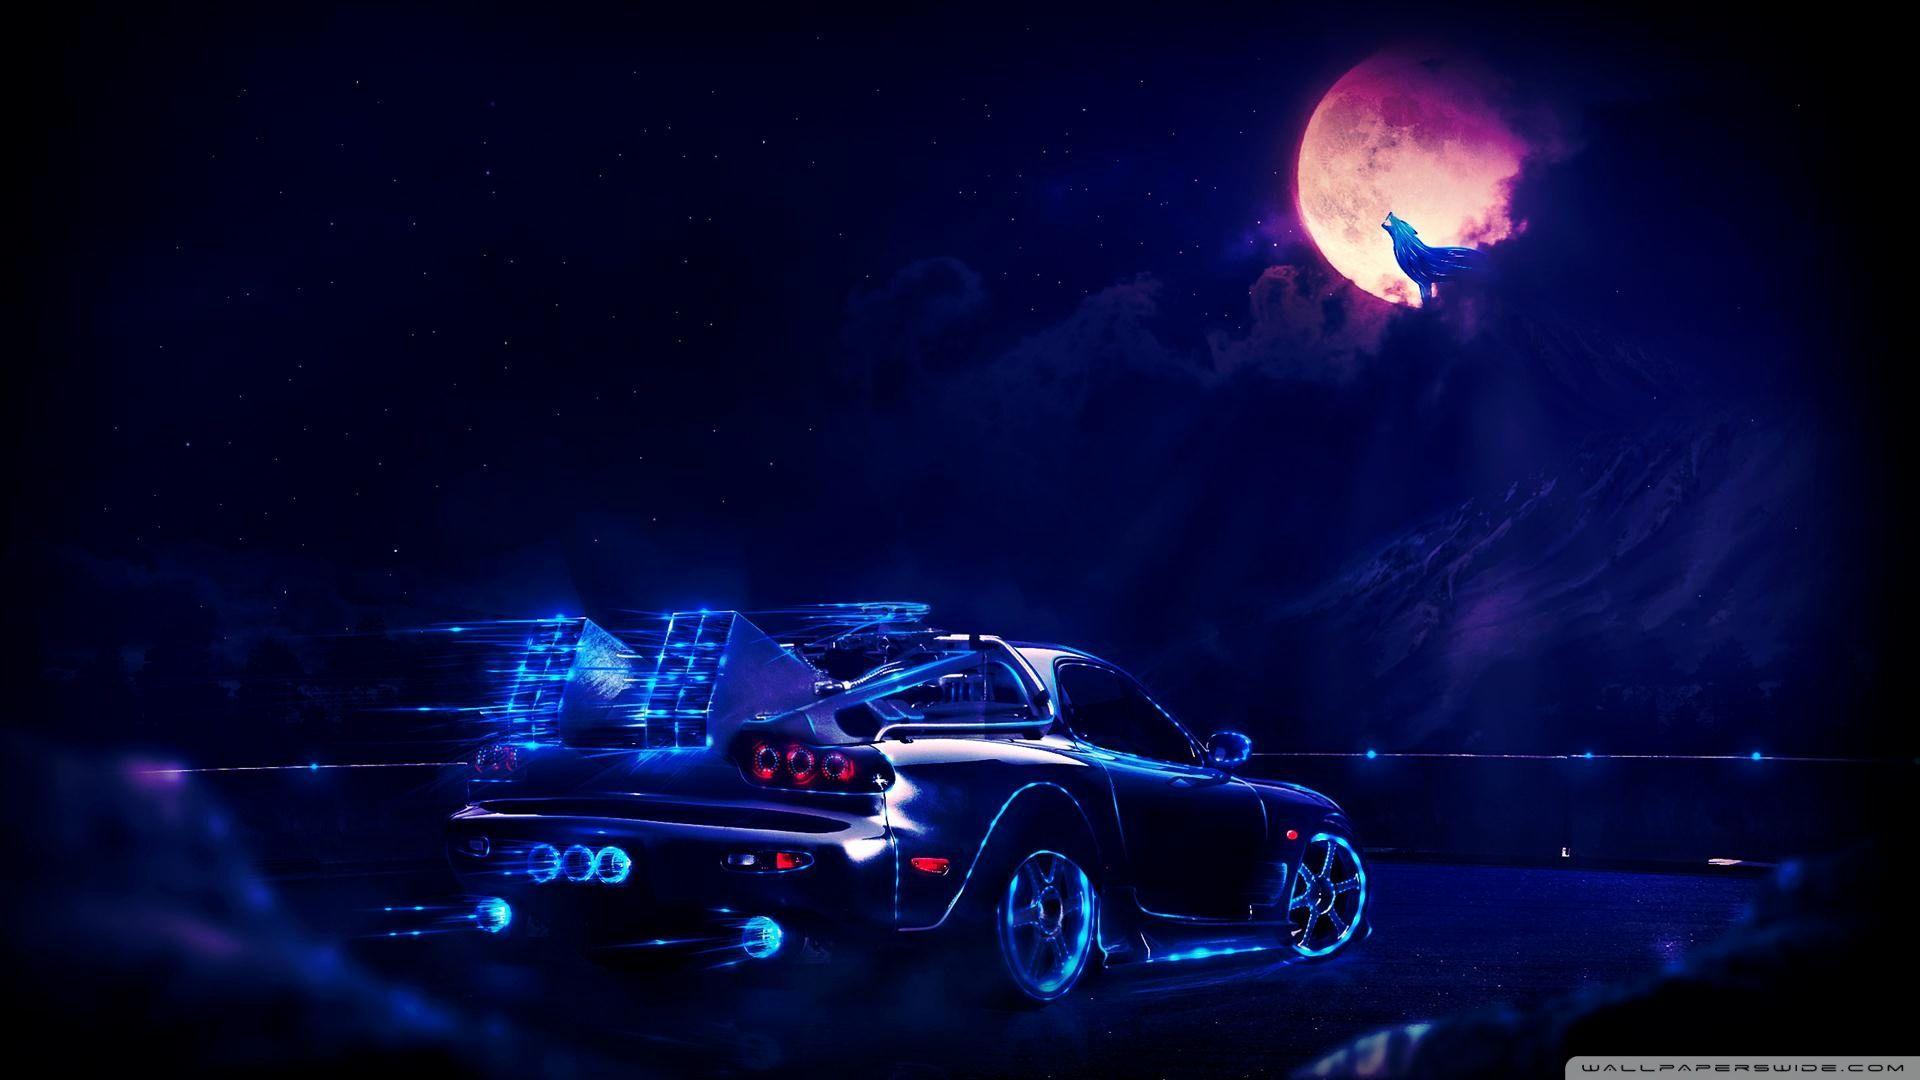 Neon Car Wallpaper Best Of Neon Car Going to the Moon Wolf A ¤ 4k HD